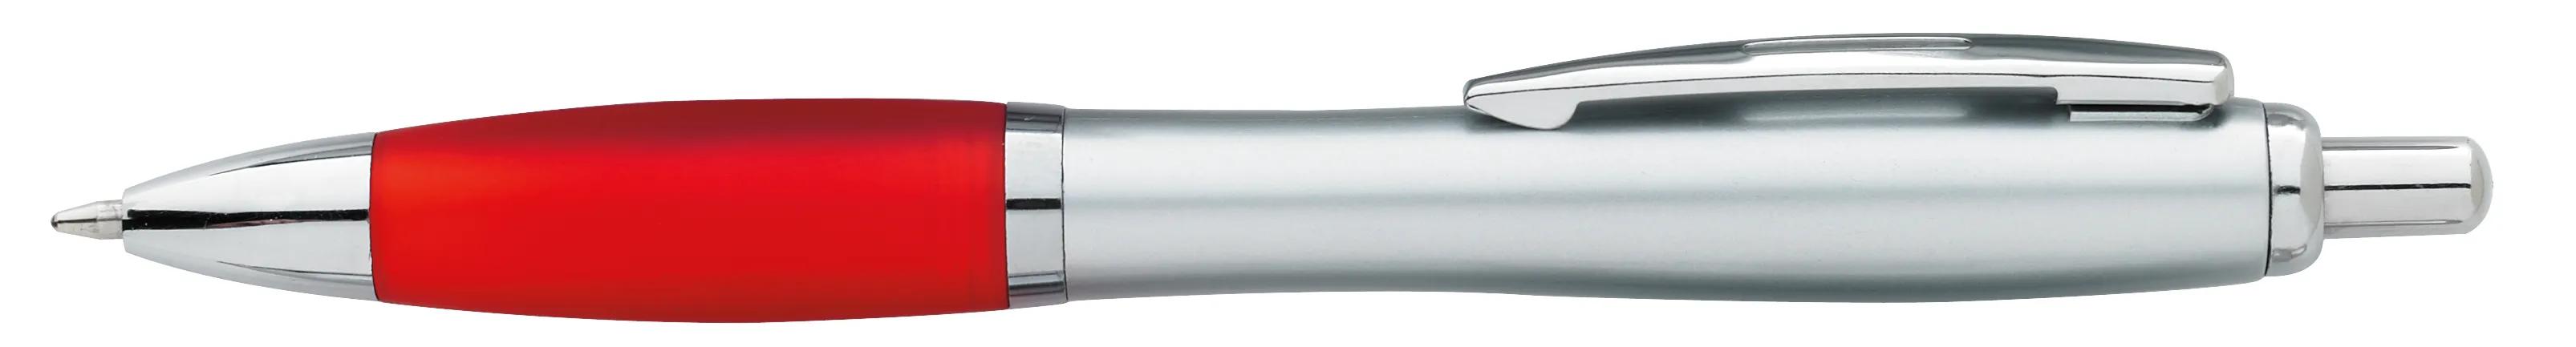 Ion Silver Pen 20 of 43